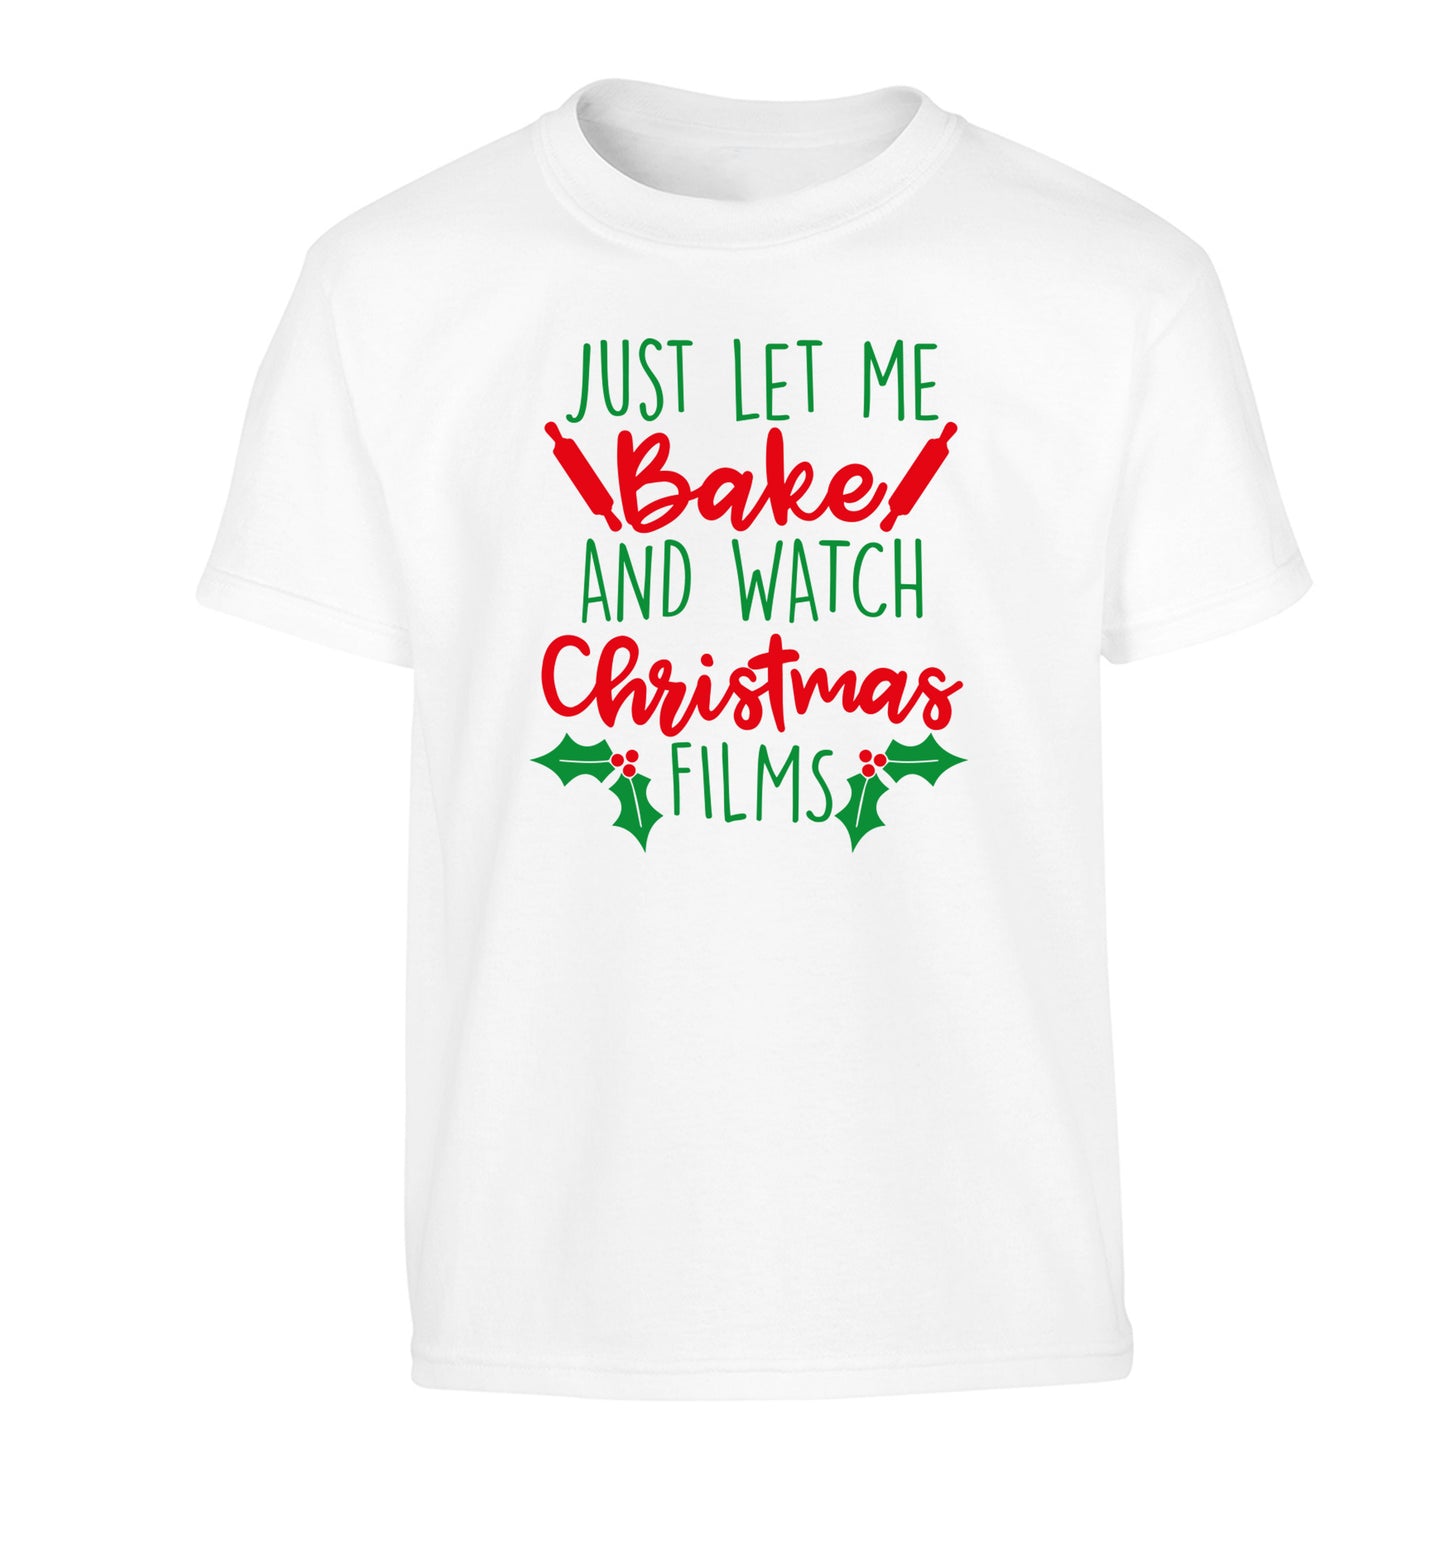 Just let me bake and watch Christmas films Children's white Tshirt 12-14 Years